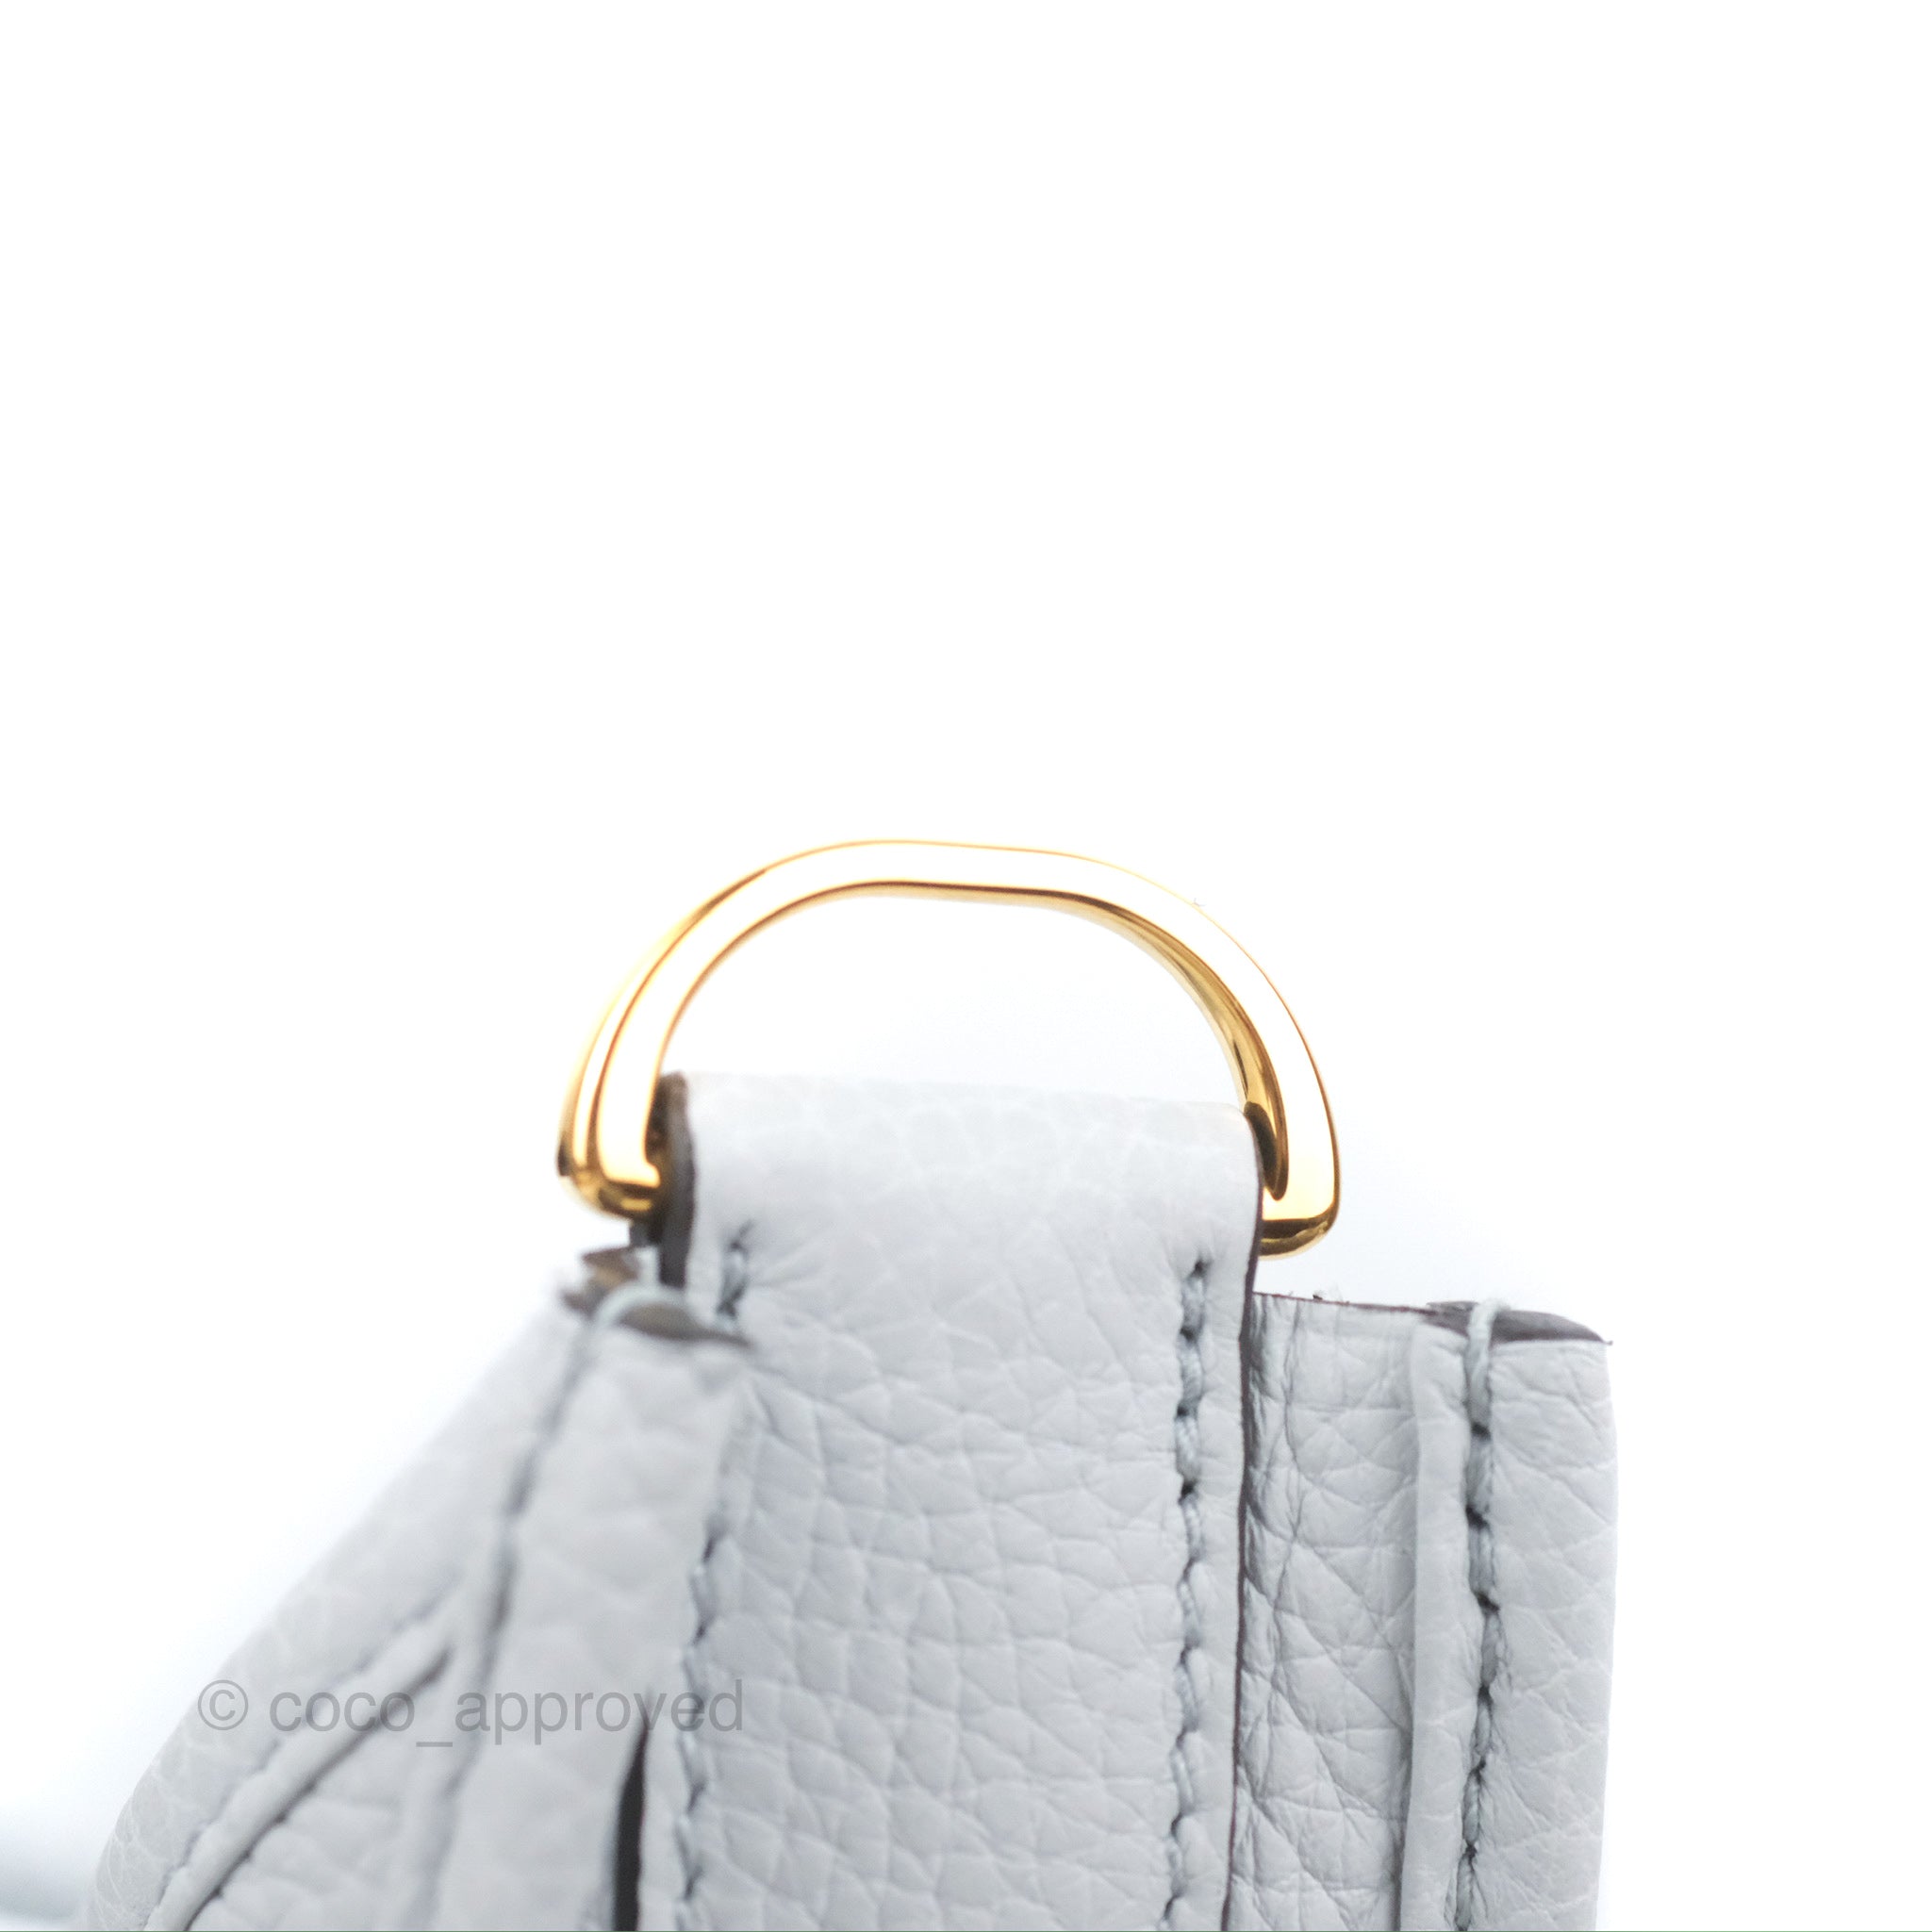 Hermès Gold Taurillon Clemence Evelyne III 29 PM Silver Hardware